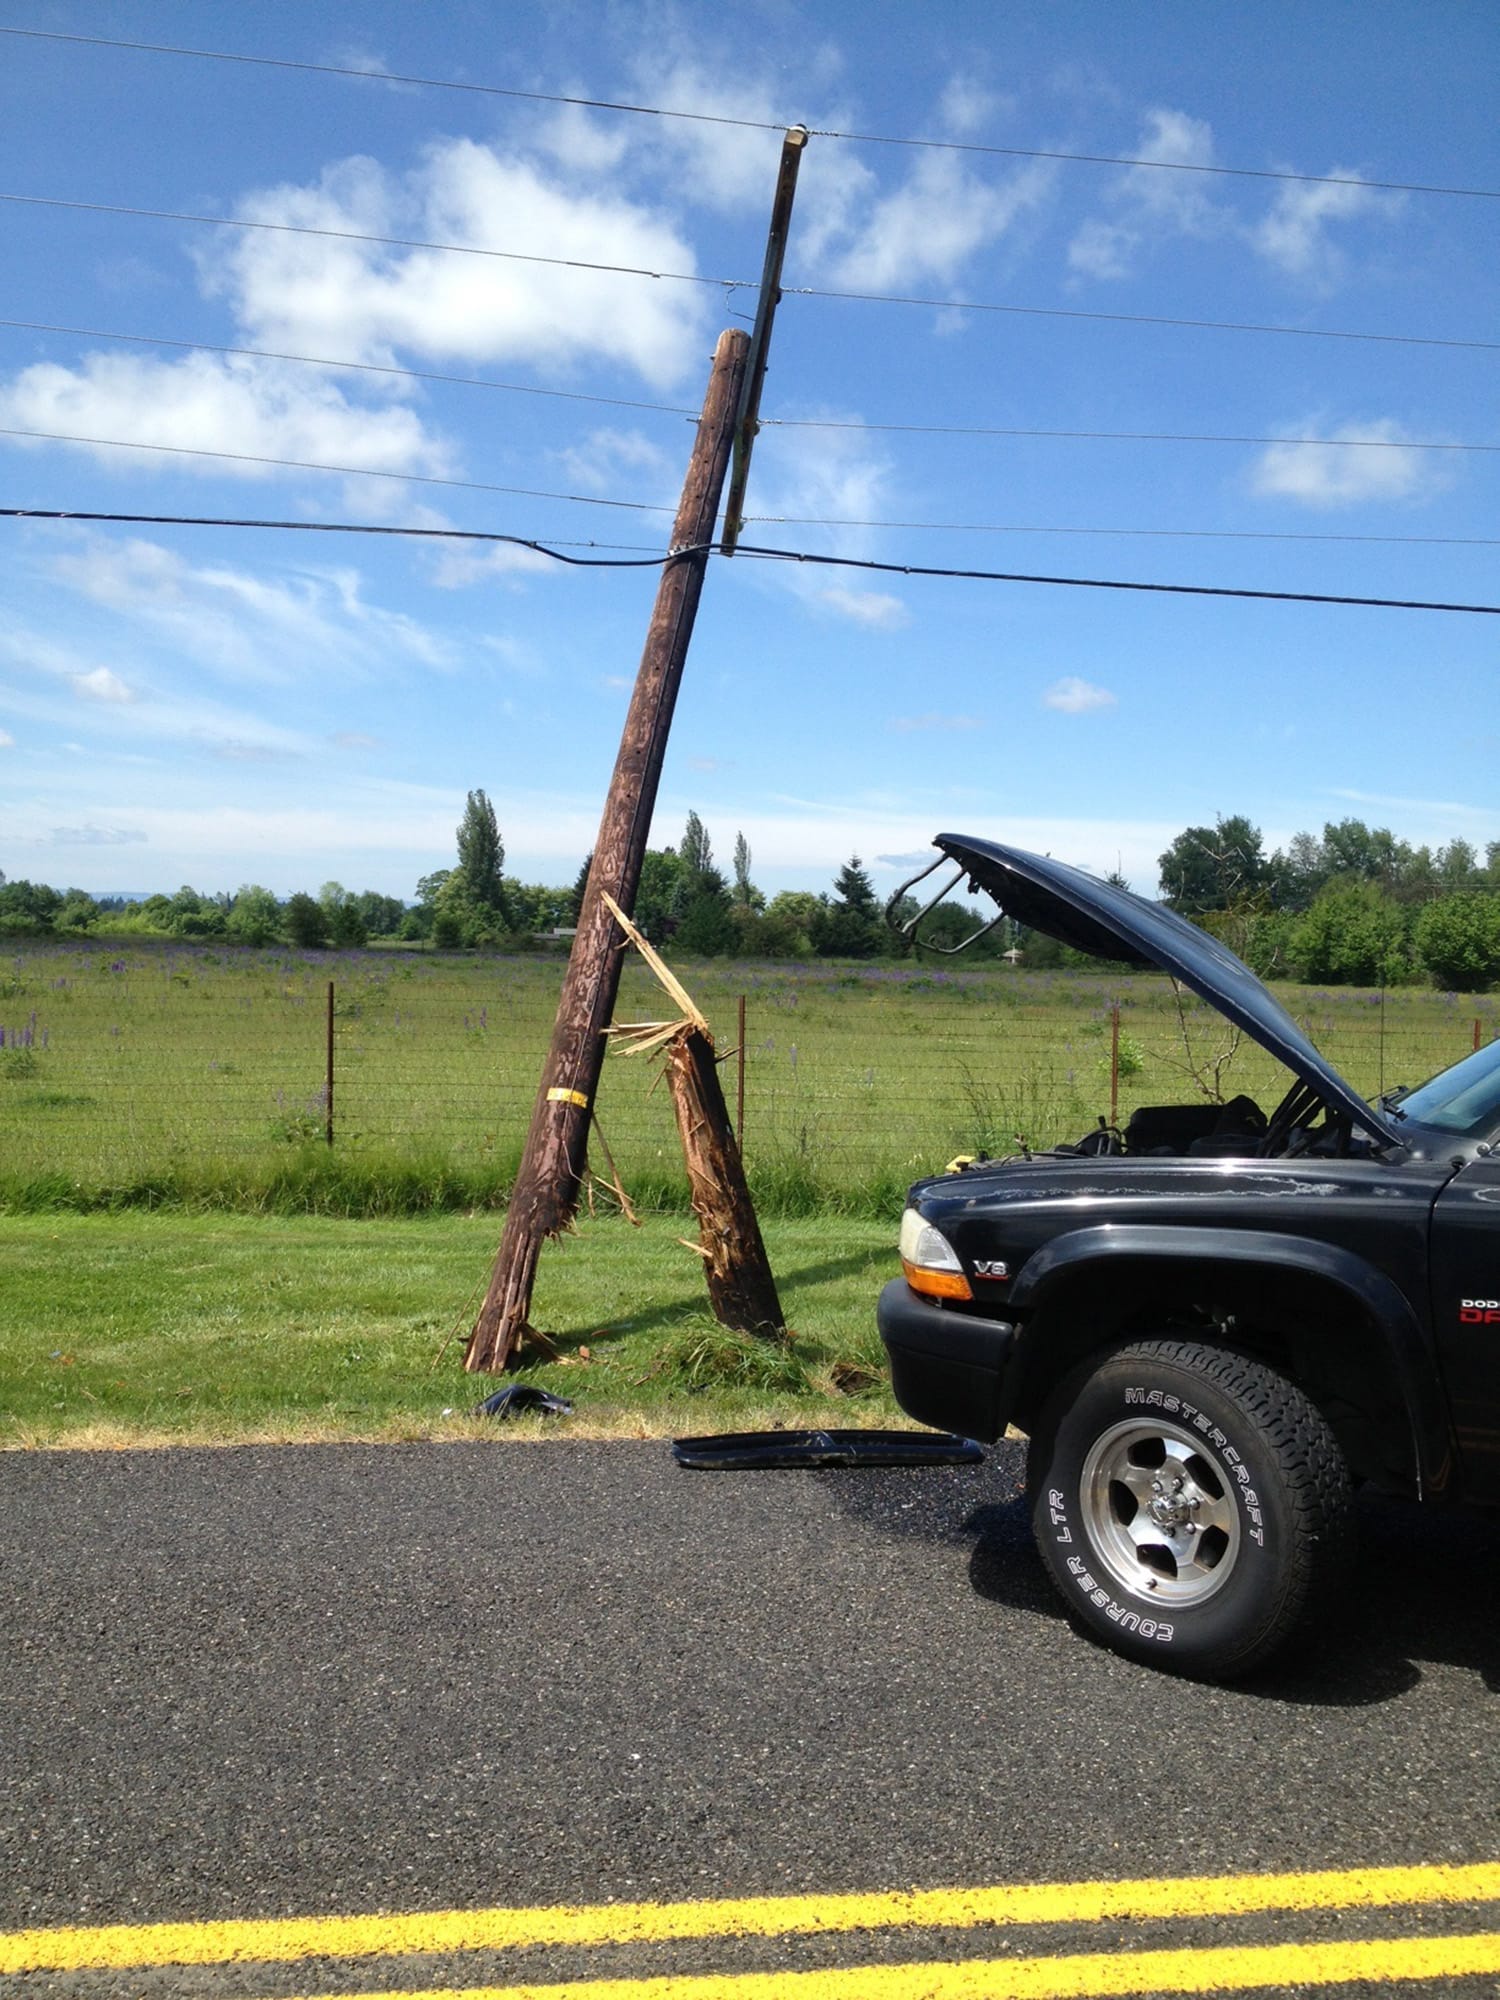 Firefighters responded Wednesday to a single-vehicle crash that split a power pole in two near Northeast 92nd Avenue and 179th Street northeast of Brush Prairie.